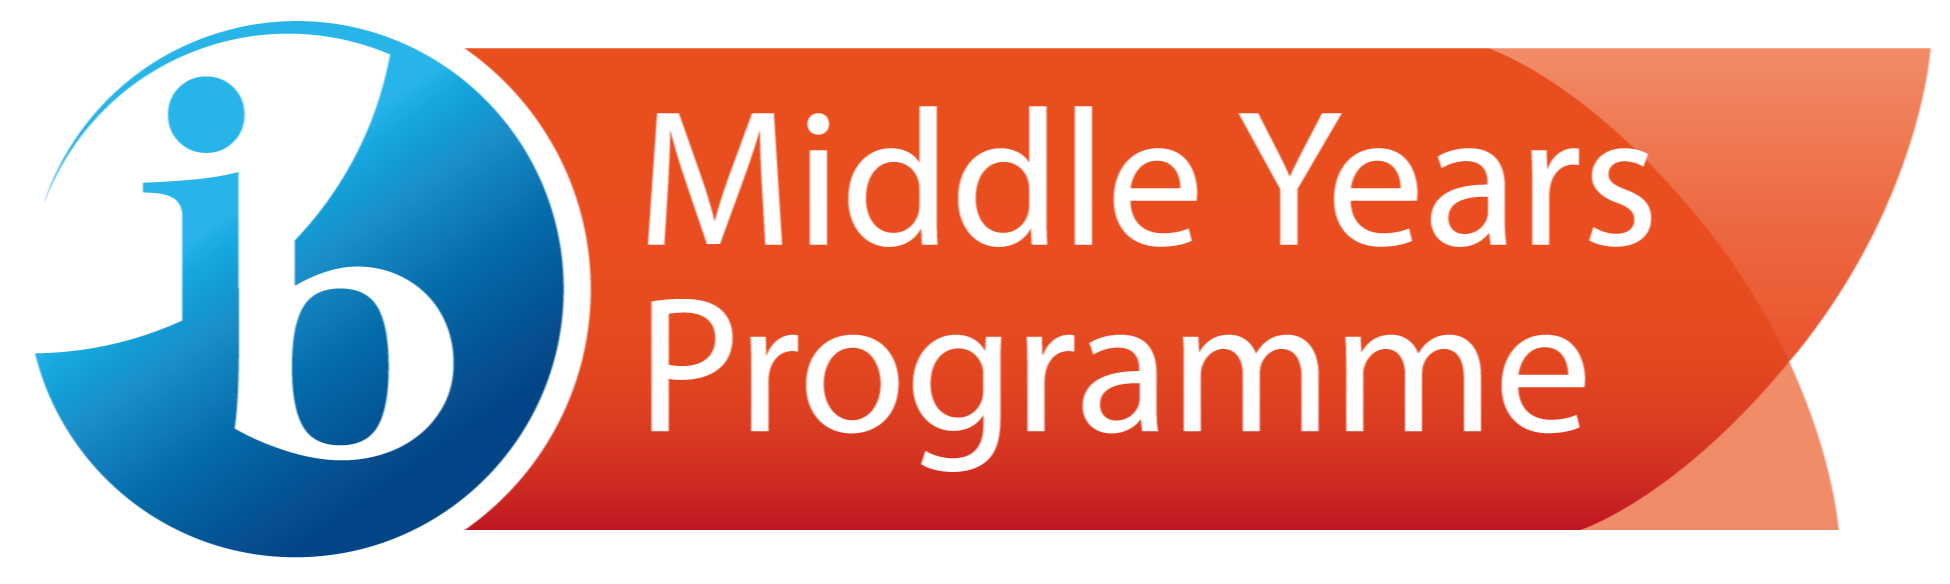 Middle Years Programme